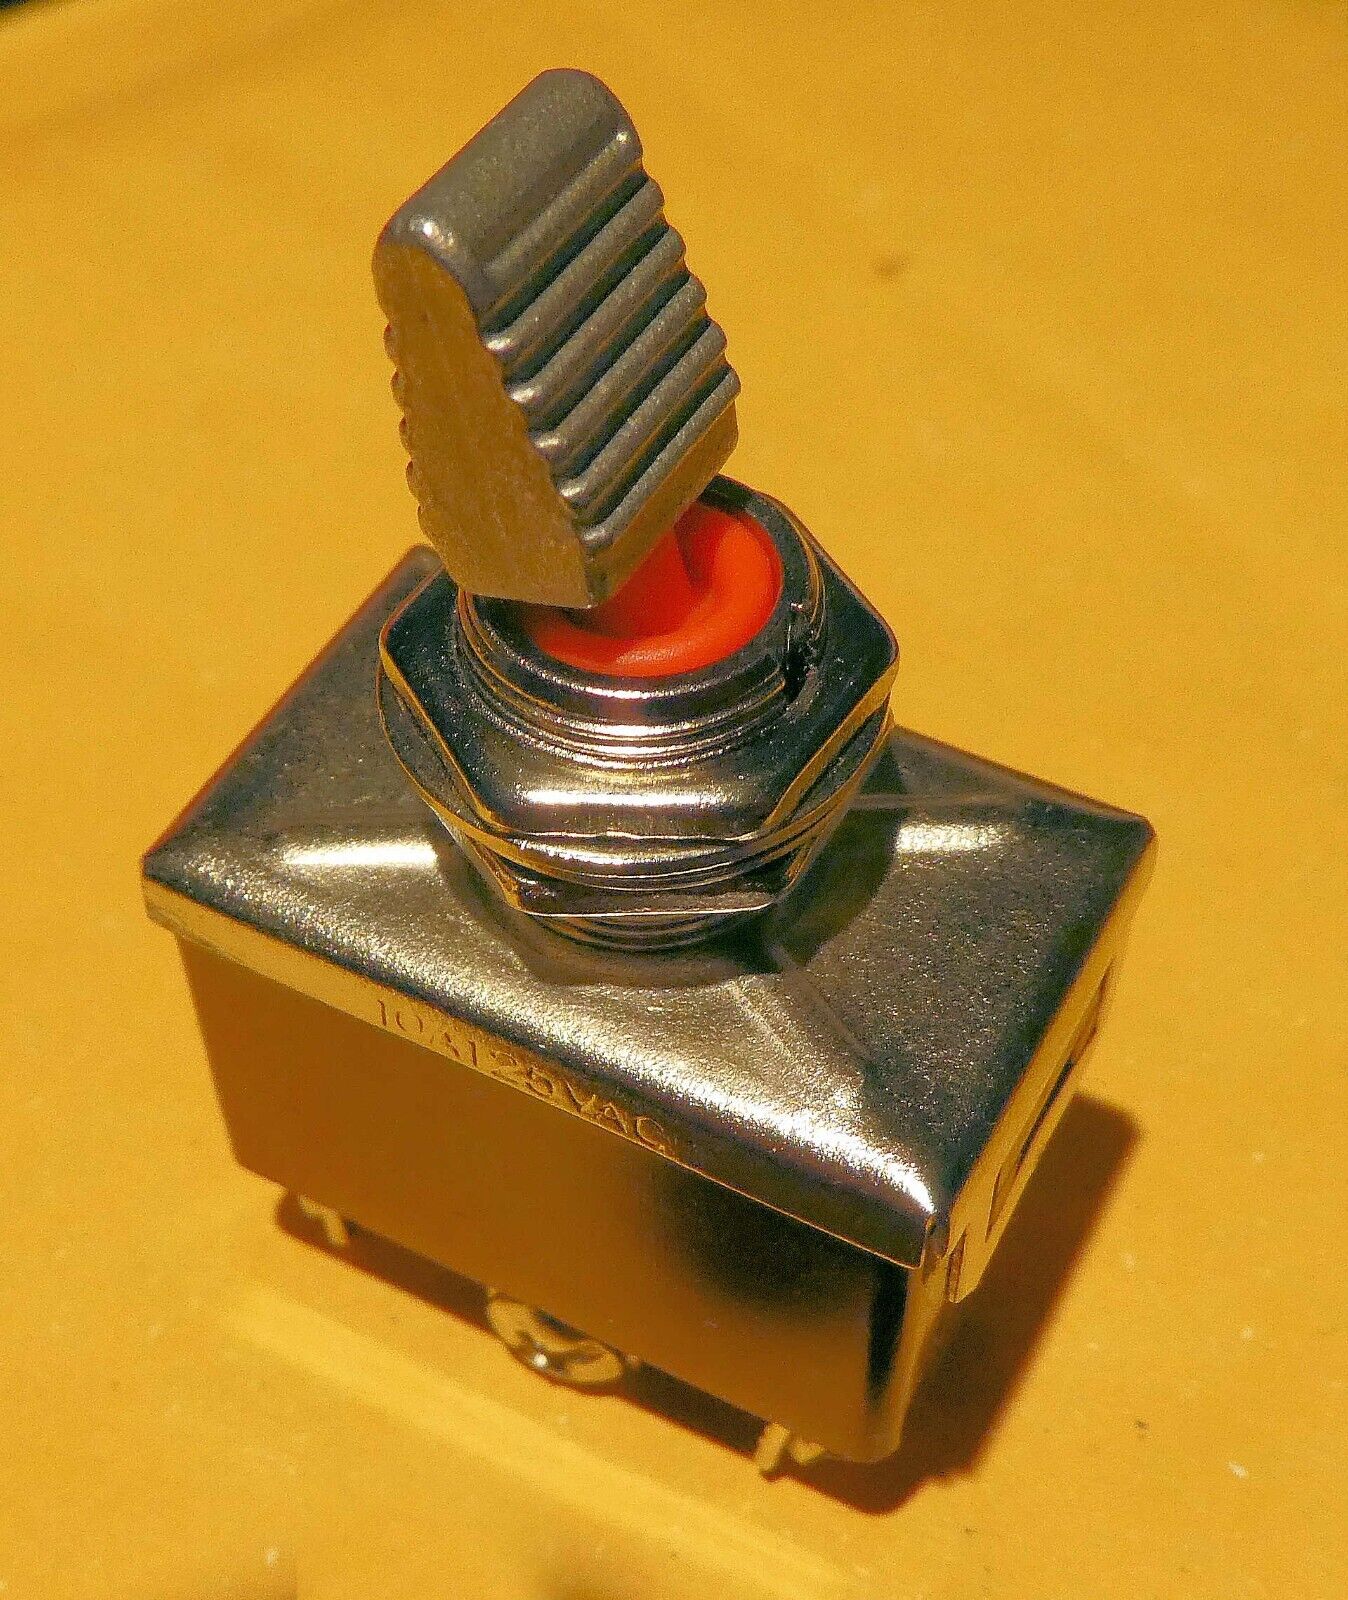 Reproduction NASA Toggle Switches (without guards)